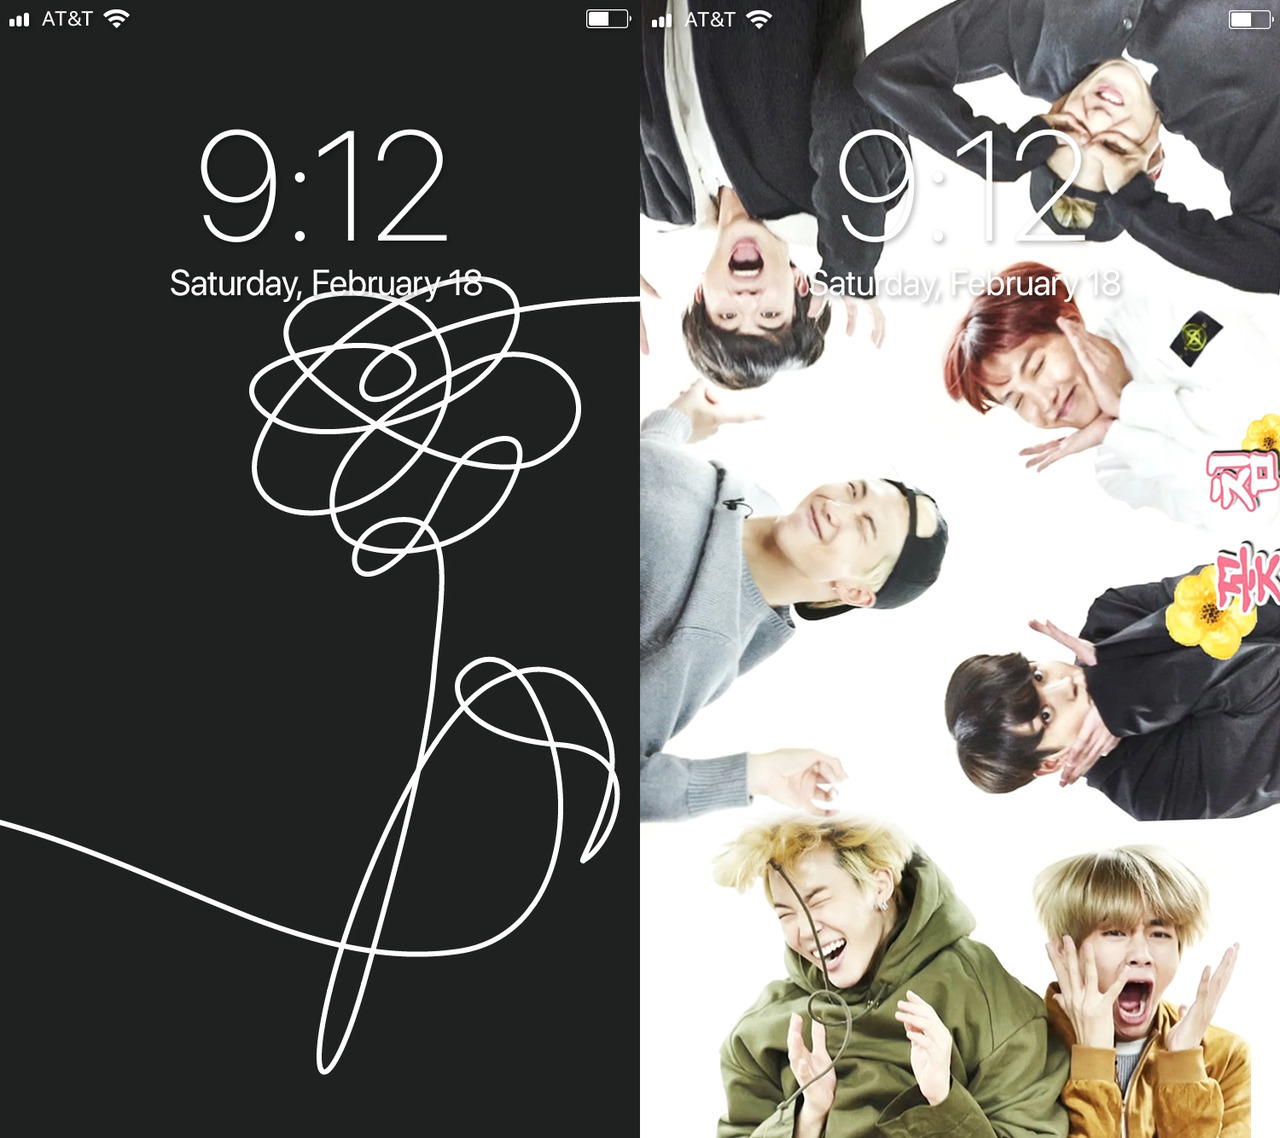 I Realized That I Never Released The Lockscreen Im Good Im Done